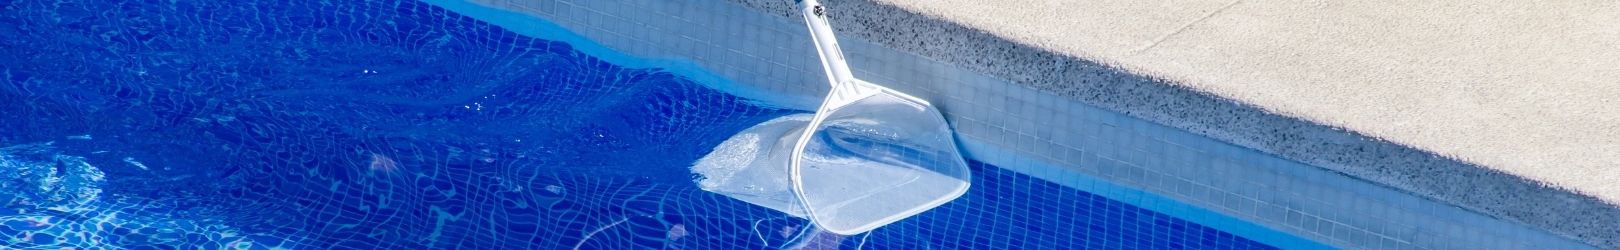 <div style="text-align: center;"><span style="font-size: 18px;">Finding the right equipment can make all the difference and improve the functionality of your pool and spa so you are able to clean less and enjoy more.</span></div>
<div style="text-align: center;"><span style="font-size: 18px;">Water Test Kits, Solutions, Hose Joiners, Algae Brushes, Pool Brooms, Vacuum Heads, Leaf Scoops and Water Witch Sensors all available at Irribiz.</span></div>
<div style="text-align: center;"><span style="font-size: 18px;">For any enquiries or additional advice needed on Pool and Spa Accessories please do not hesitate to call us on 1800 191 138 or email at <a href="mailto:online@irribiz.com.au" title="Pool and Spa Enquiry Email" target="_blank" rel="noopener">online@irribiz.com.au.</a></span></div>